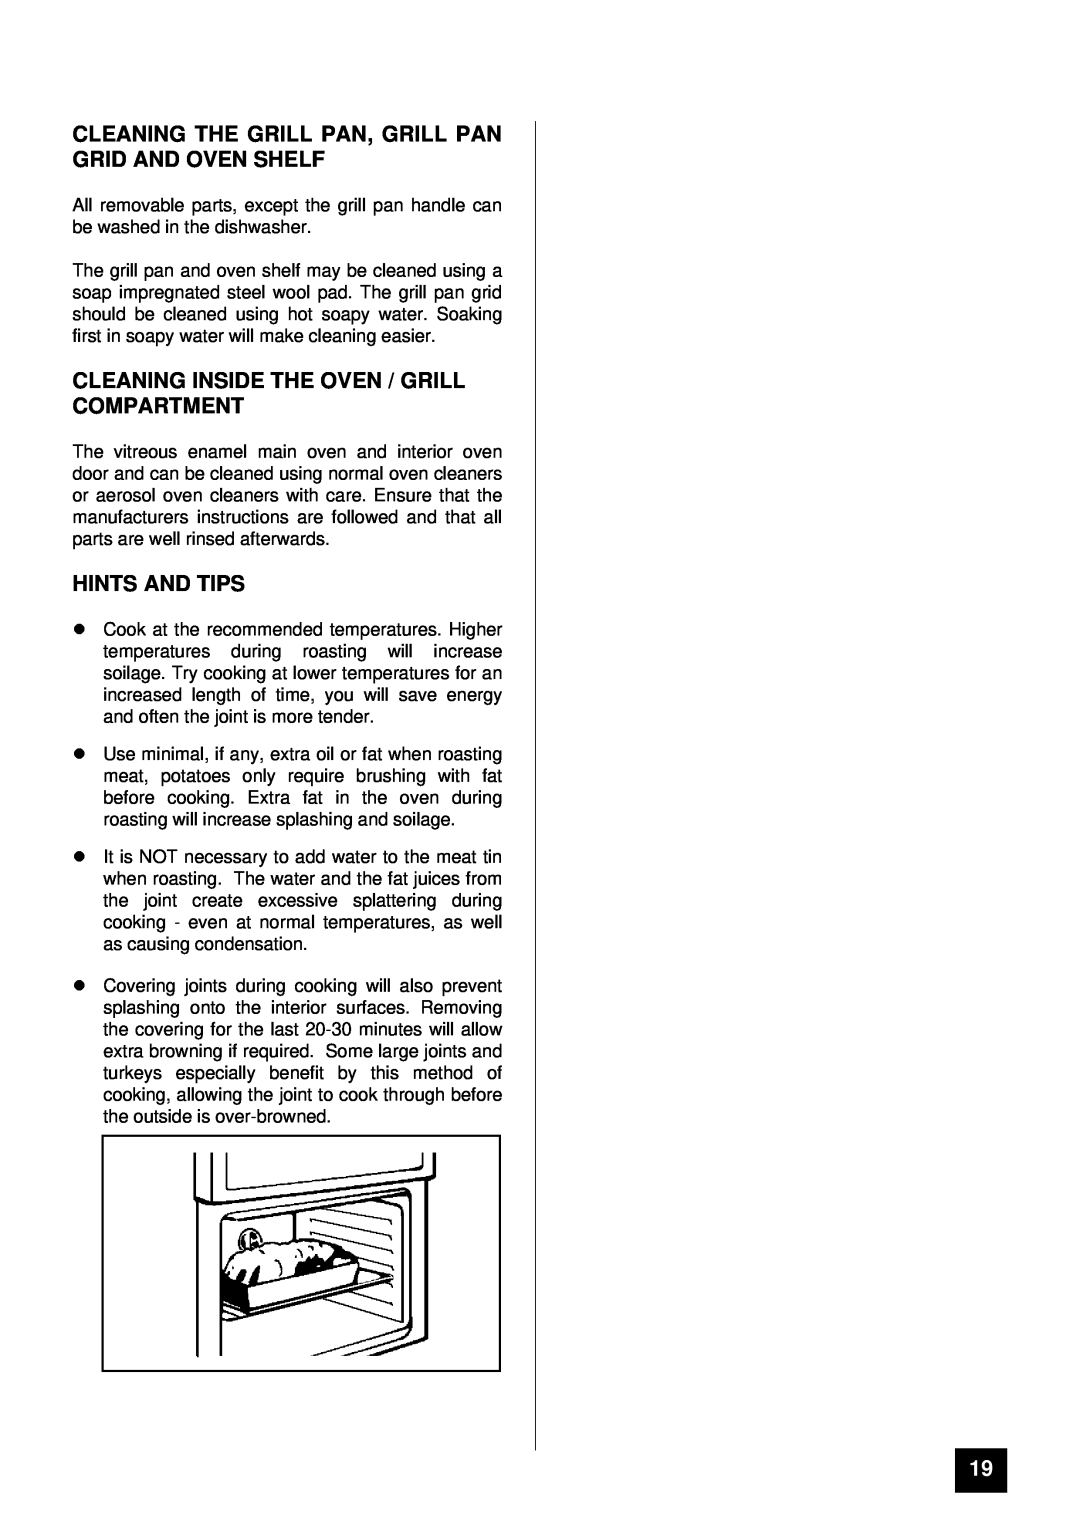 Tricity Bendix SI 221 installation instructions Cleaning Inside The Oven / Grill Compartment, Hints And Tips 